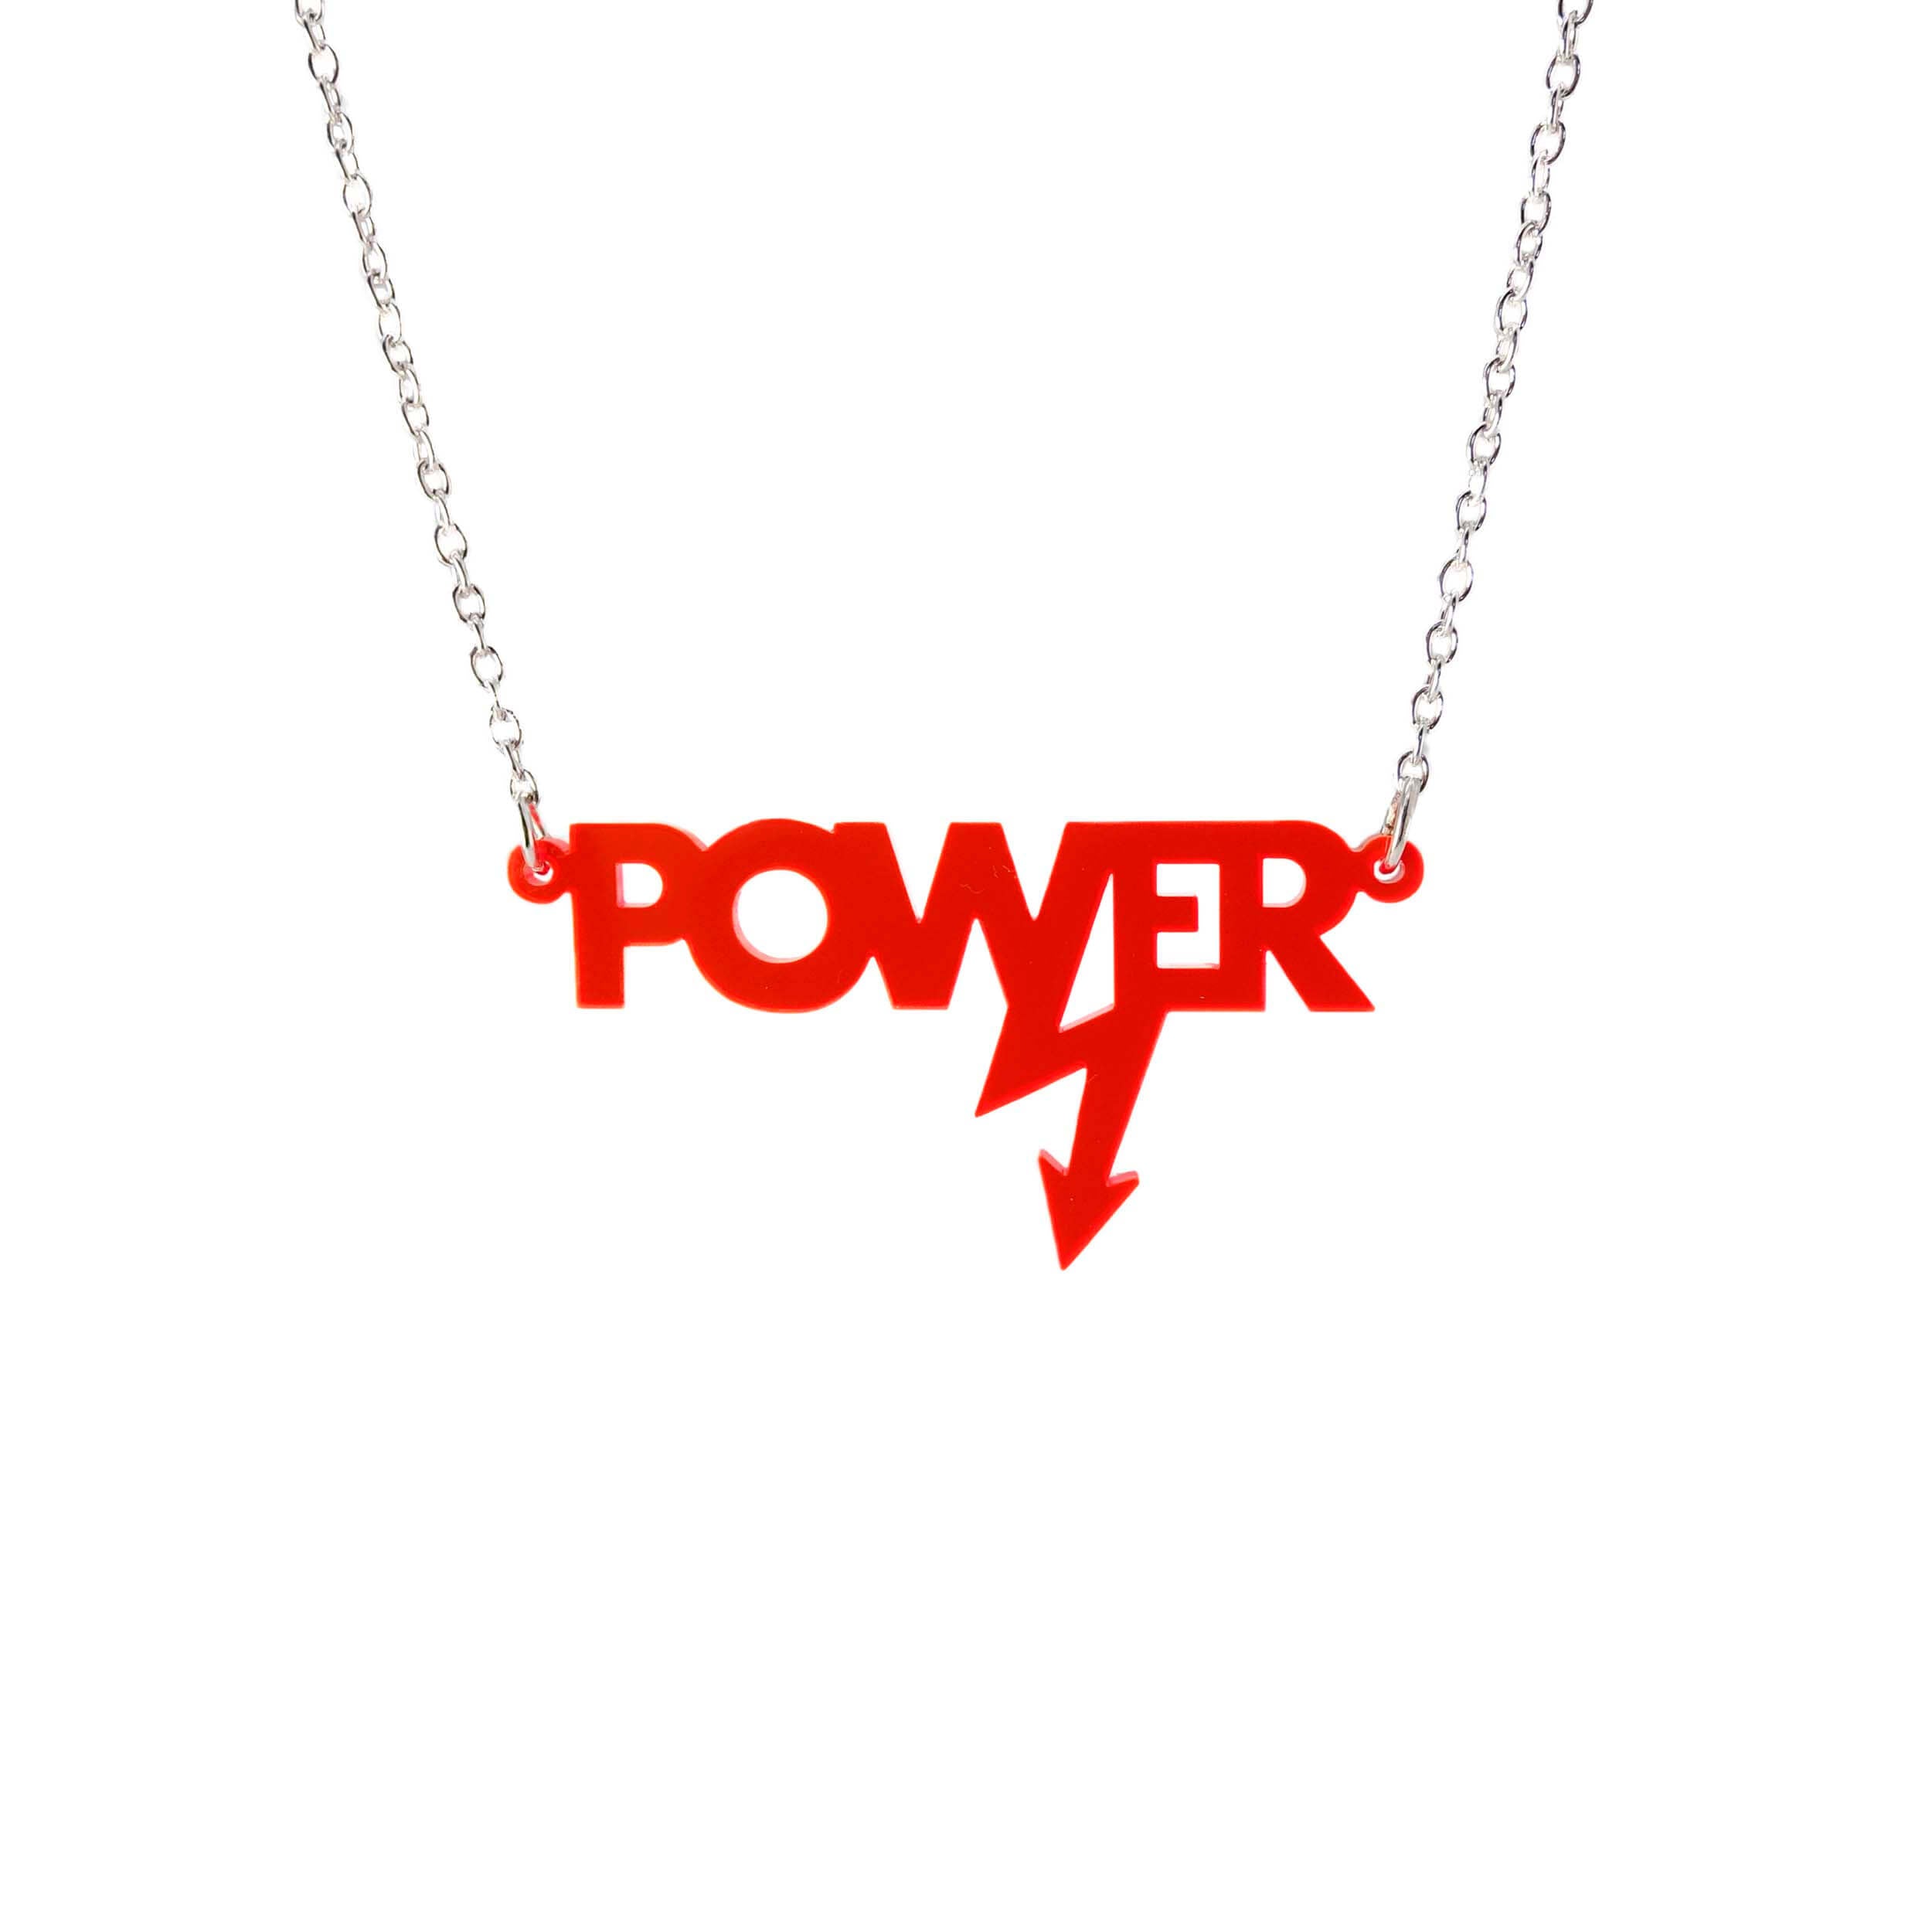 Mini power necklace in hot red shown hanging on a silver chain against a white background. Designed in collaboration with Mary Beard for her book Women and Power. 